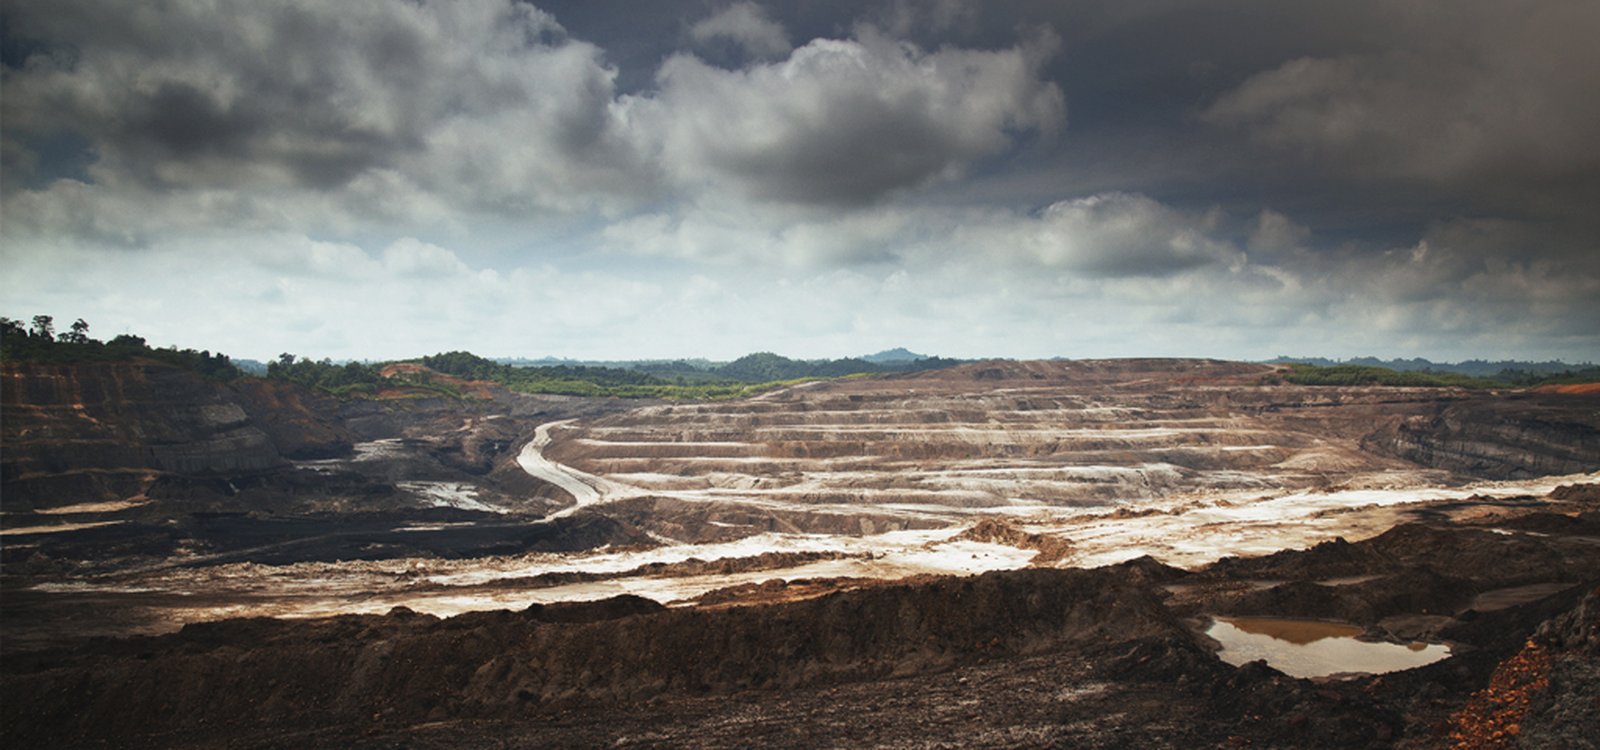 Covering some 12,000 hectares, Jembayan’s open- and multi-pit coal mine has set, and reached, ambitious production targets, growing from 4 million to 10 million tonnes per year since its acquisition.